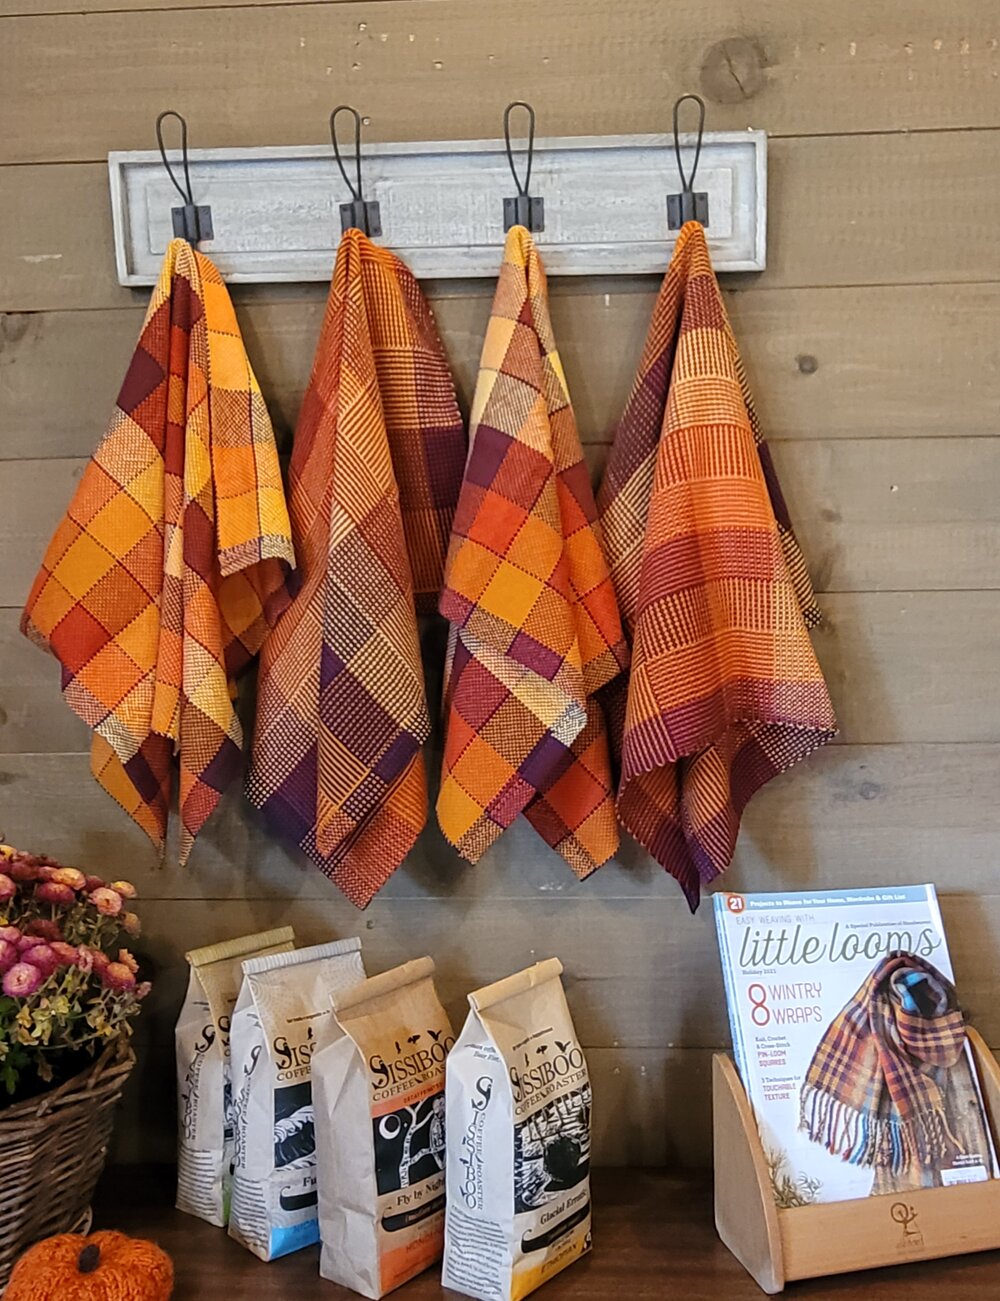 Oversized Kitchen Towels, Fun Patterns - Red Stick Spice Company